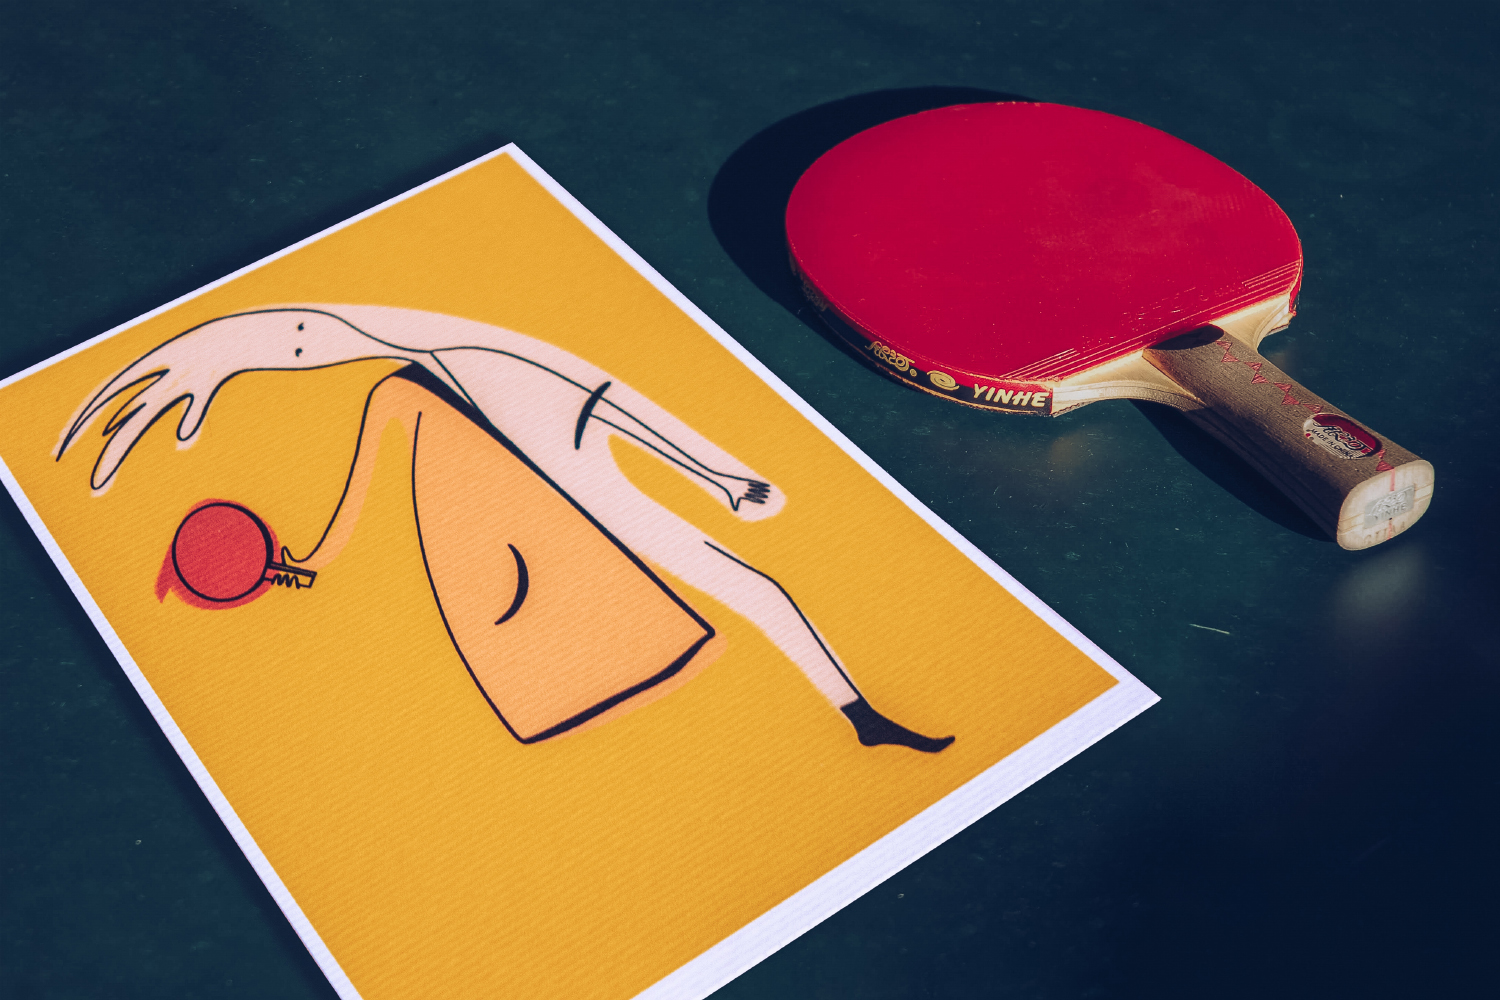 the ping pong series